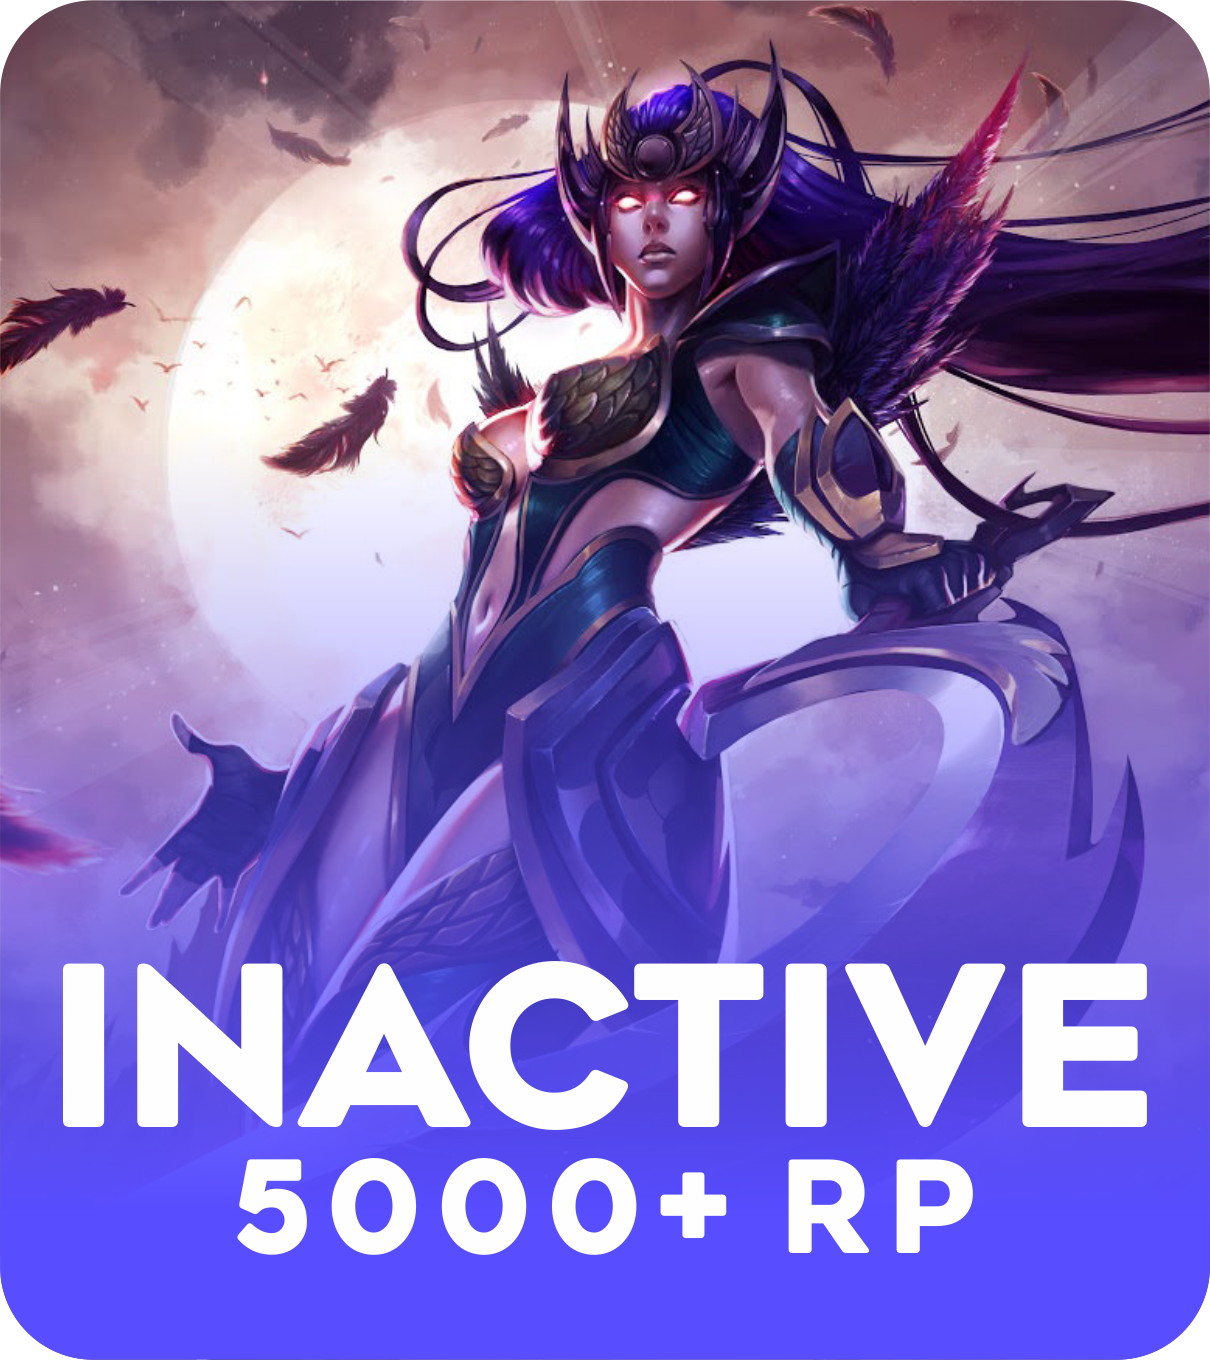 Inactive 5000+ RP Account 